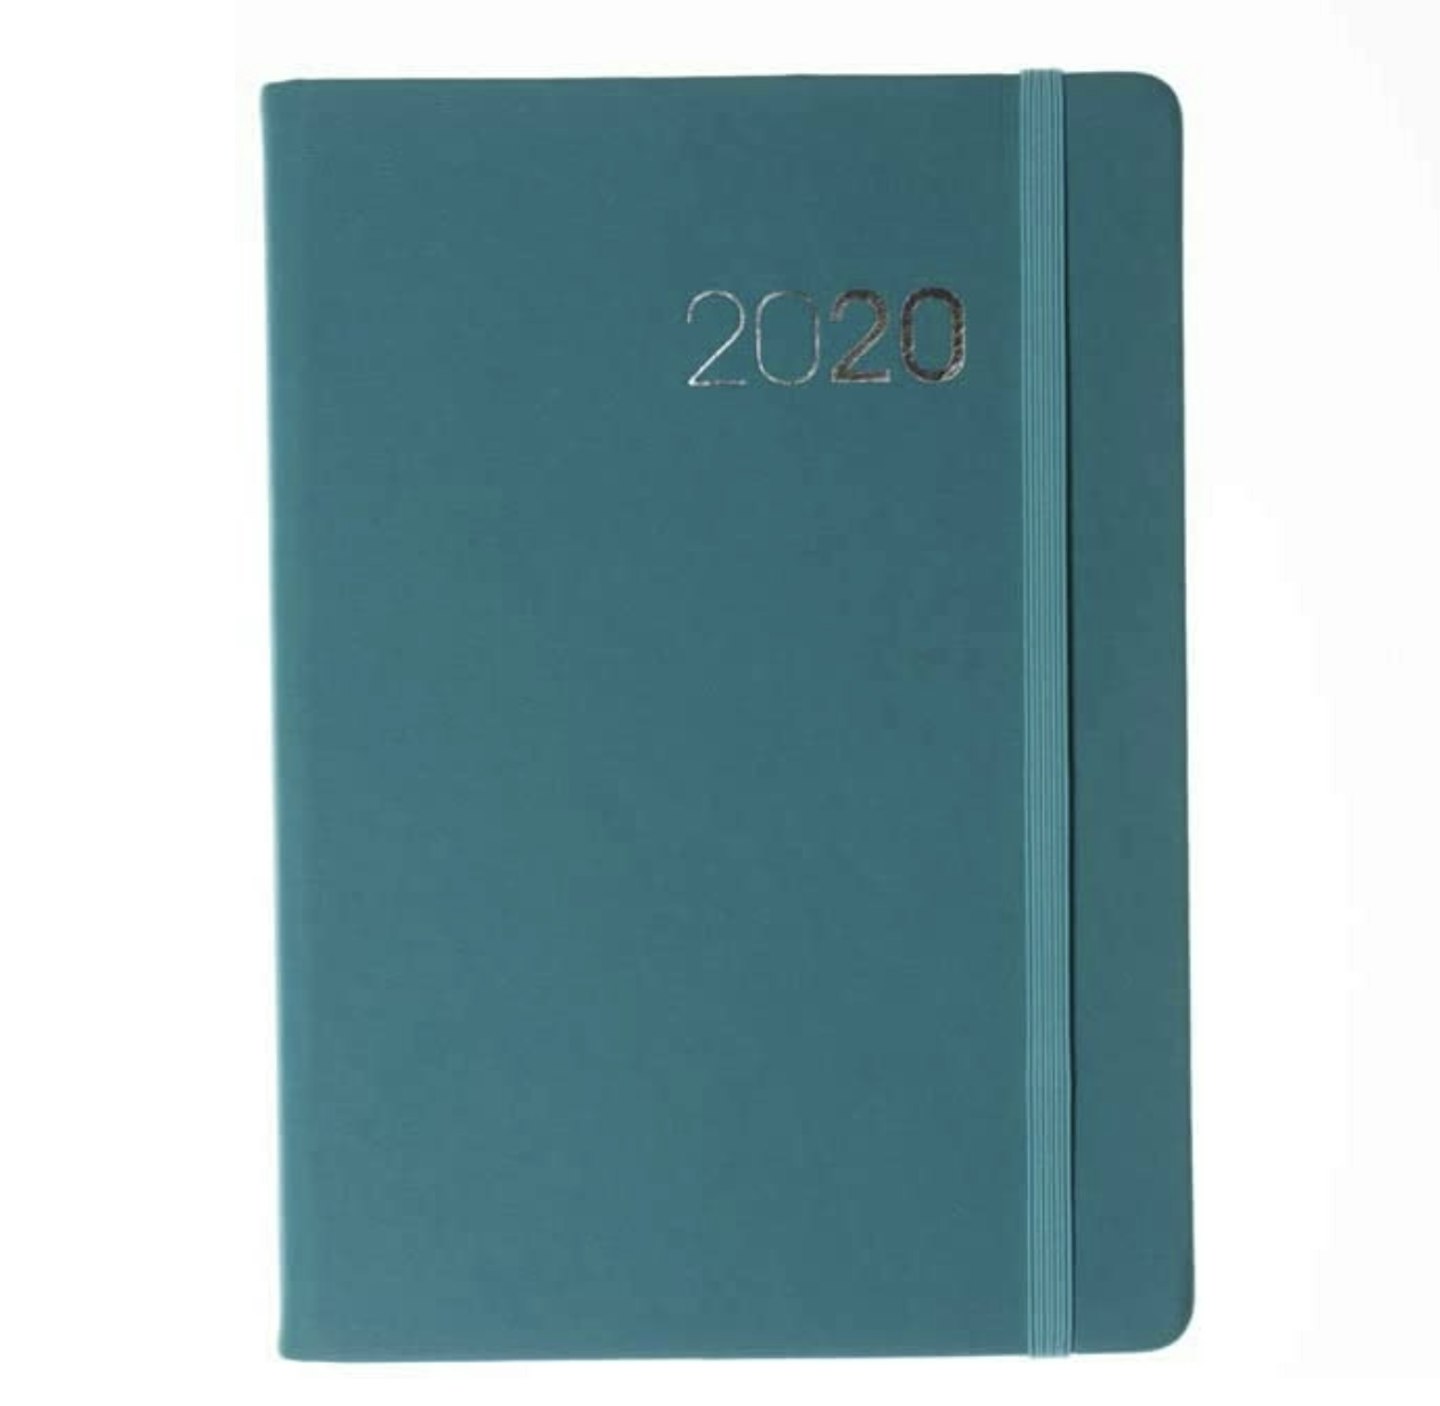 Collins Legacy A5 Week to View 2020 Diary